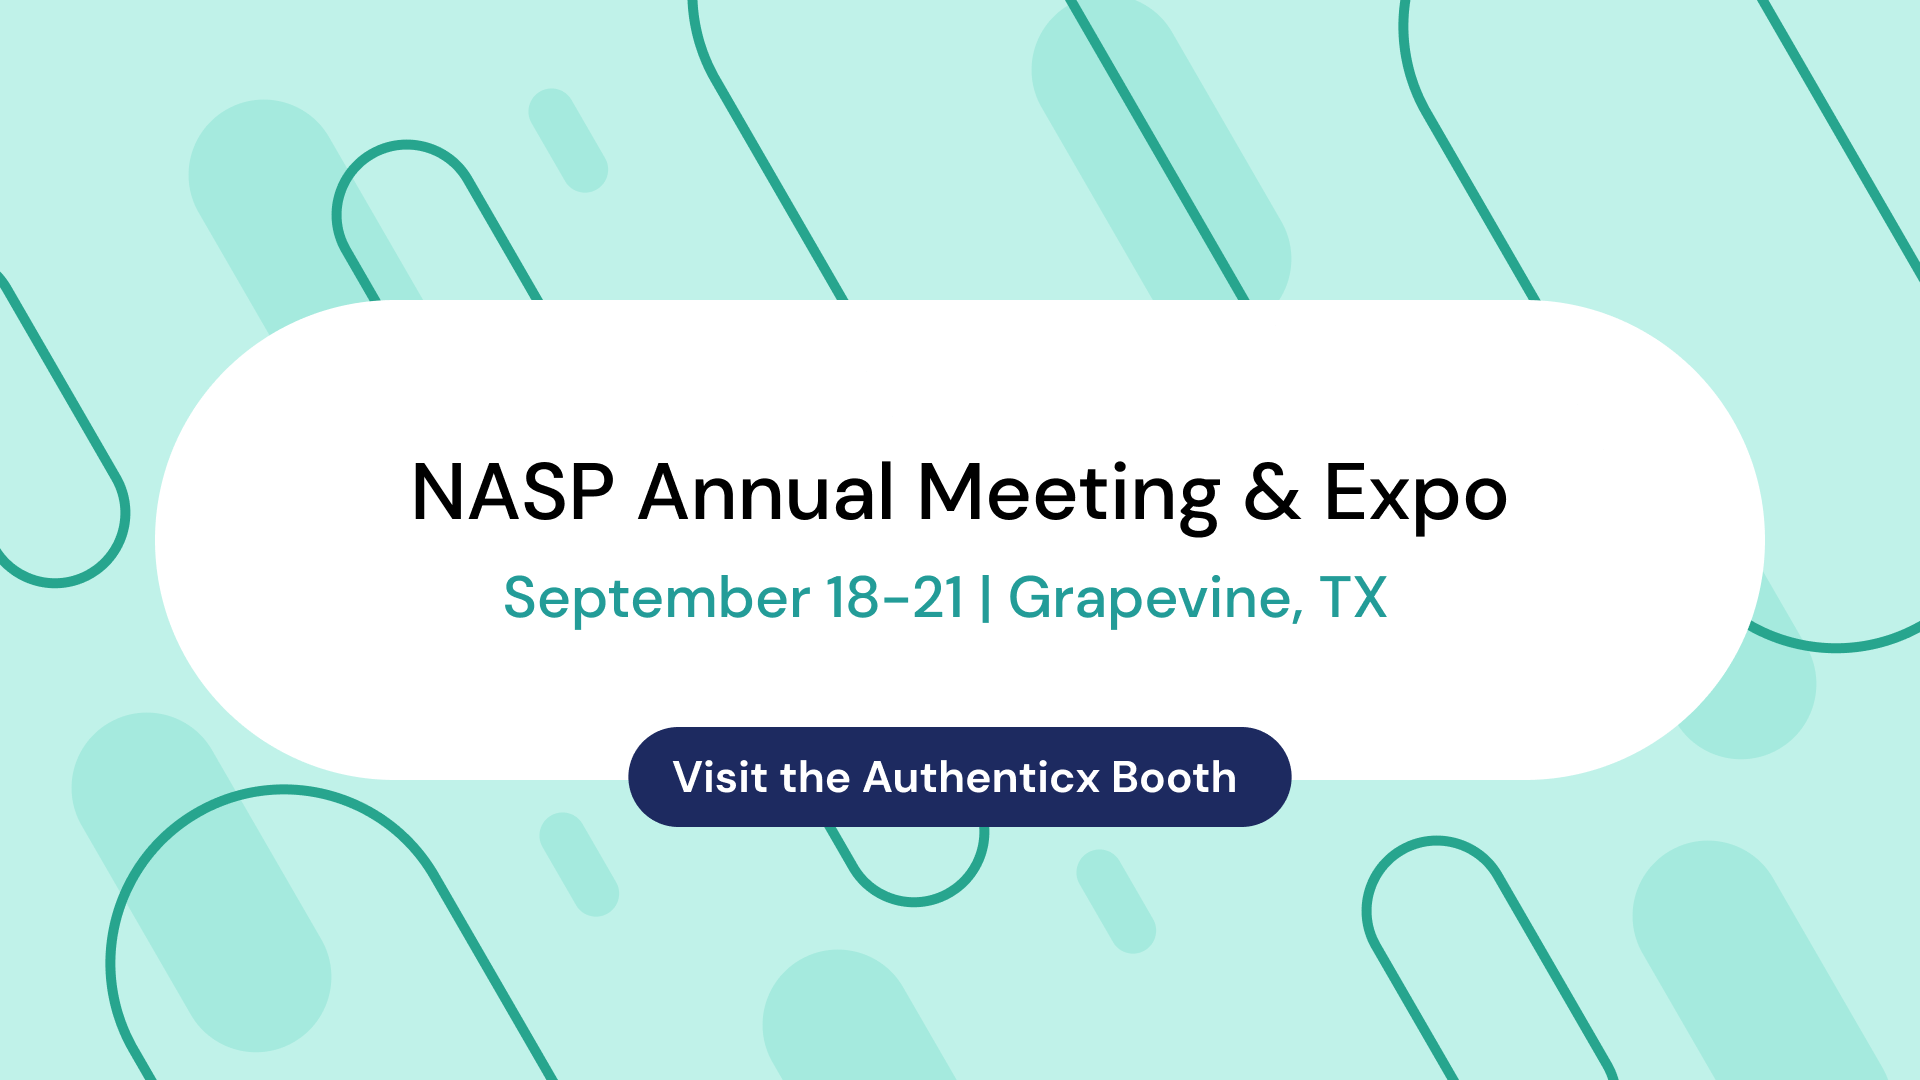 NASP Annual Meeting & Expo | Authenticx at Events